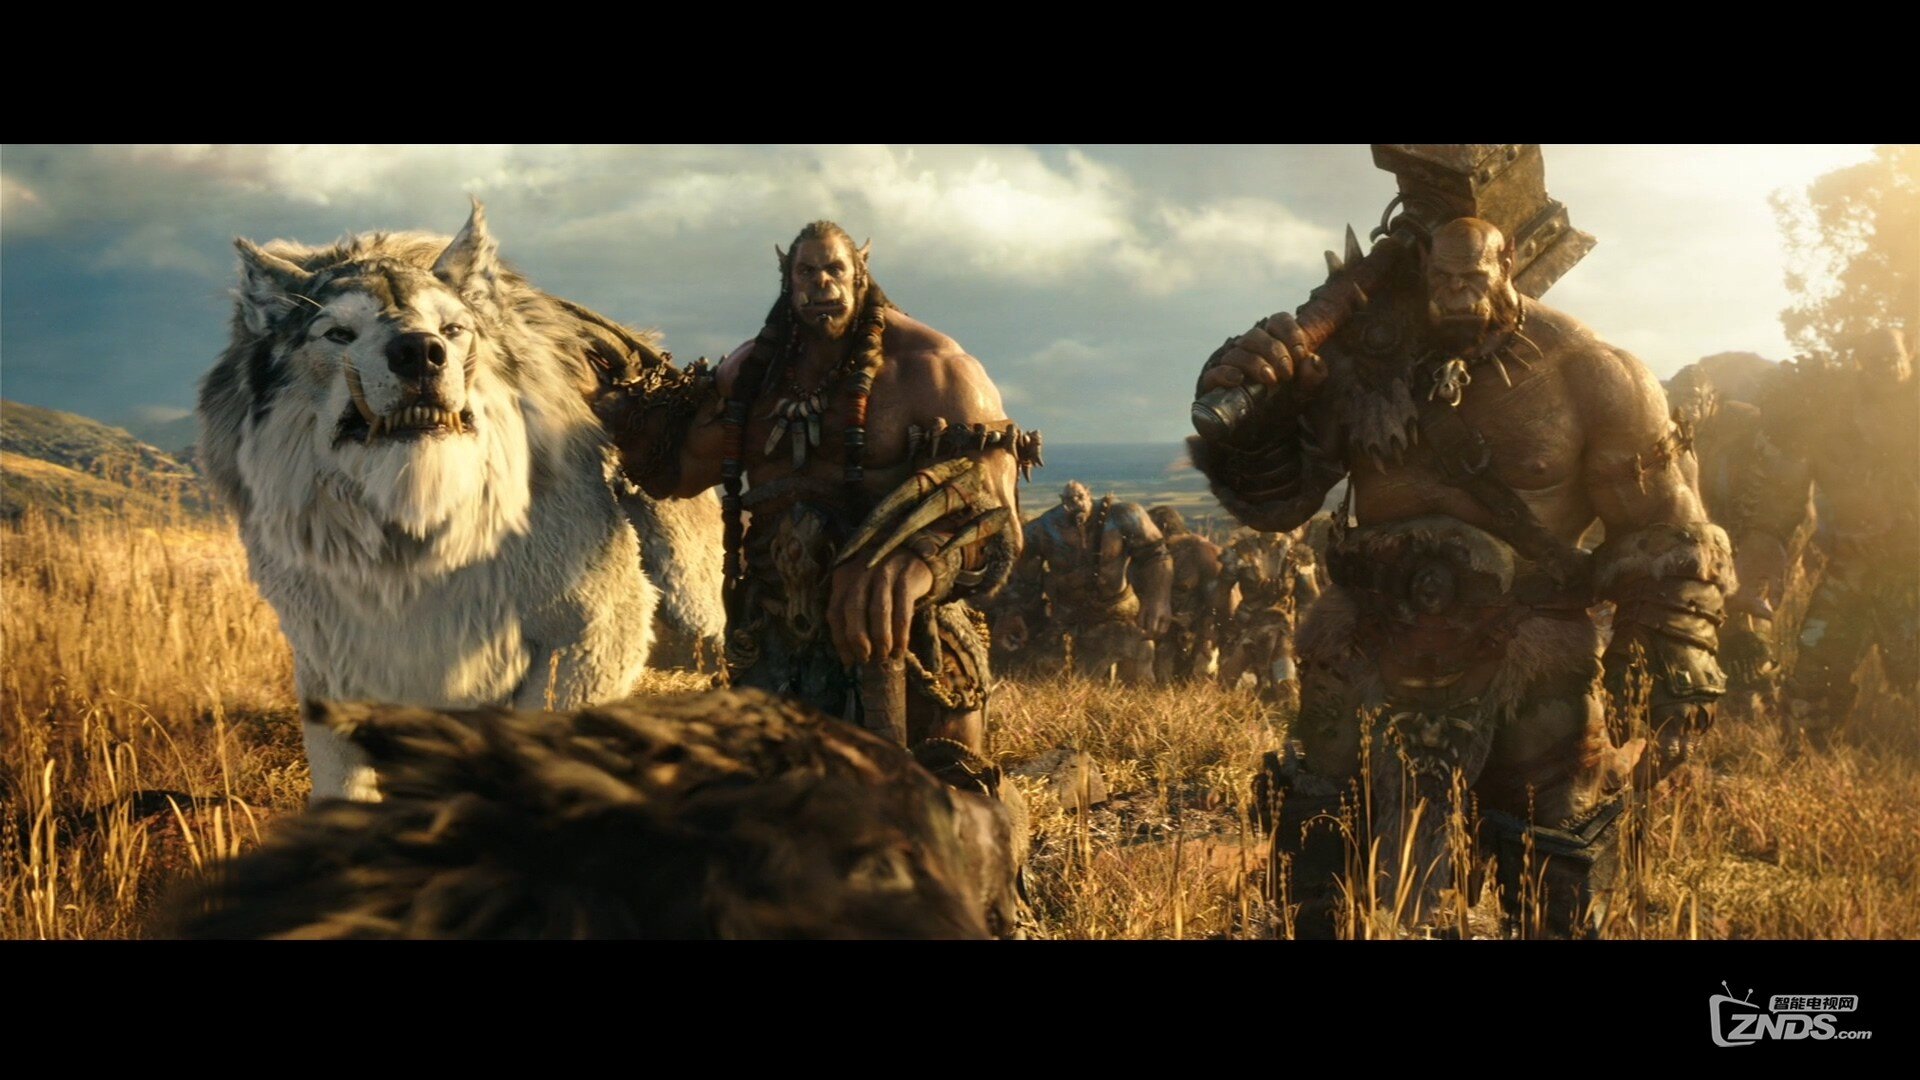 Warcraft_Trailer1_Texted_Stereo_PCM_1080p.mov_20160214_211340.609.jpg